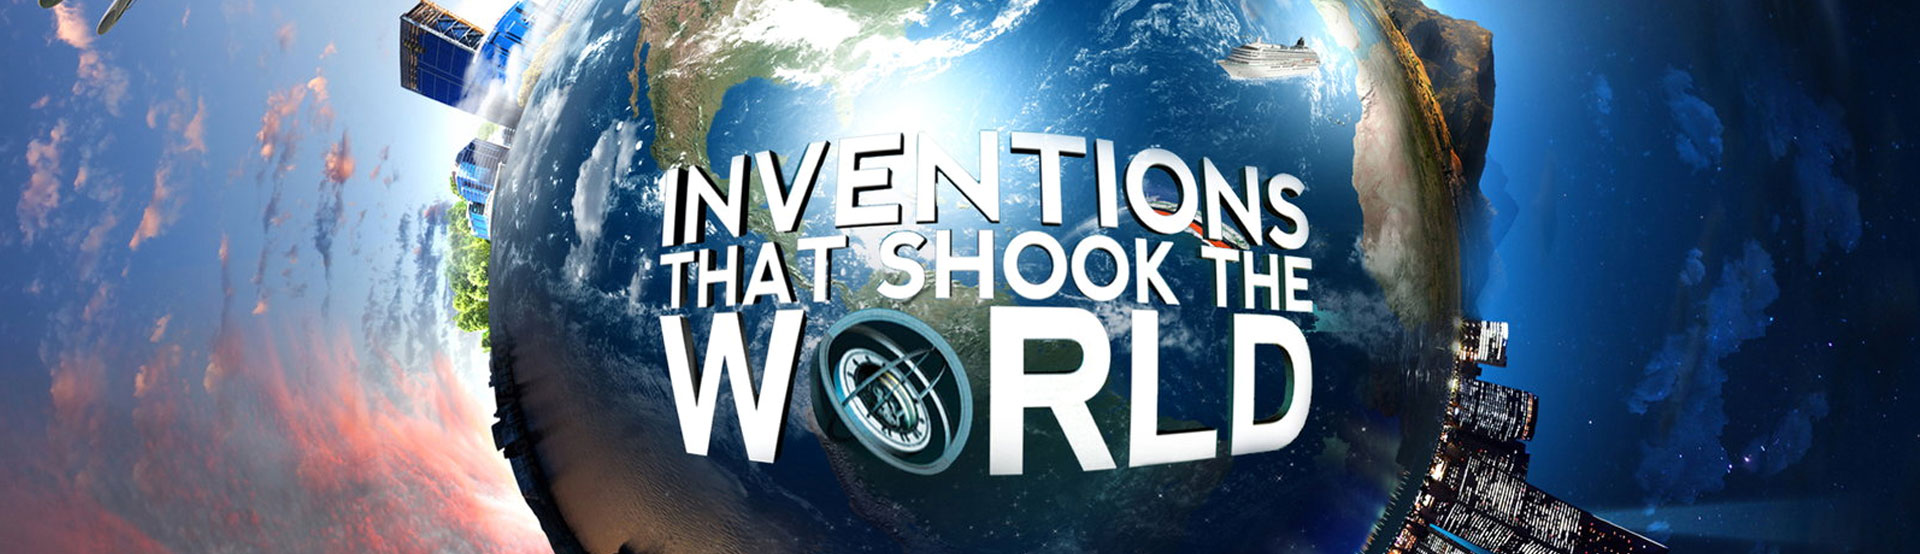 Inventions That Shook The World